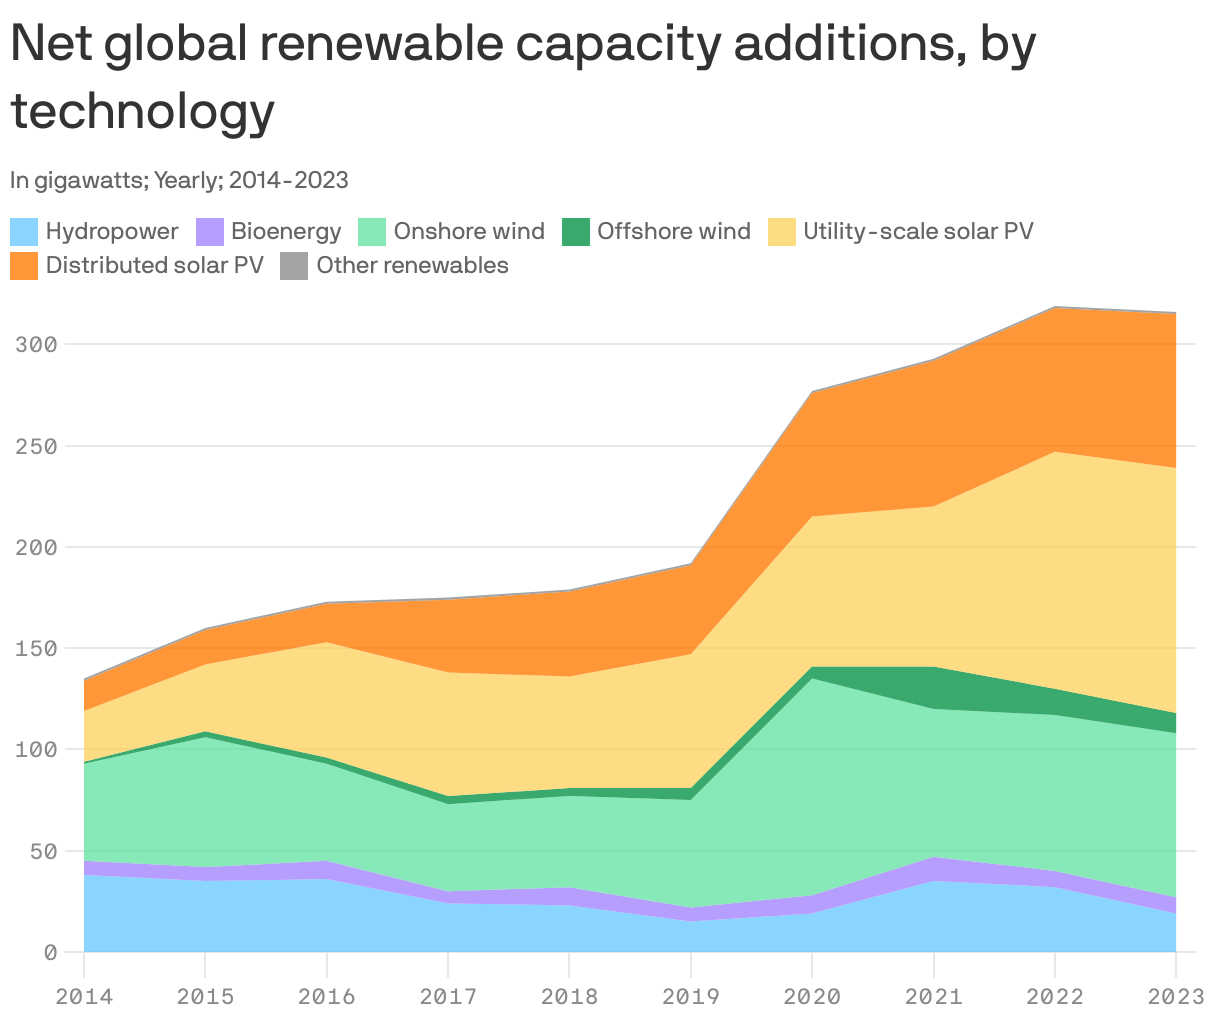 Net global renewable capacity additions, by technology